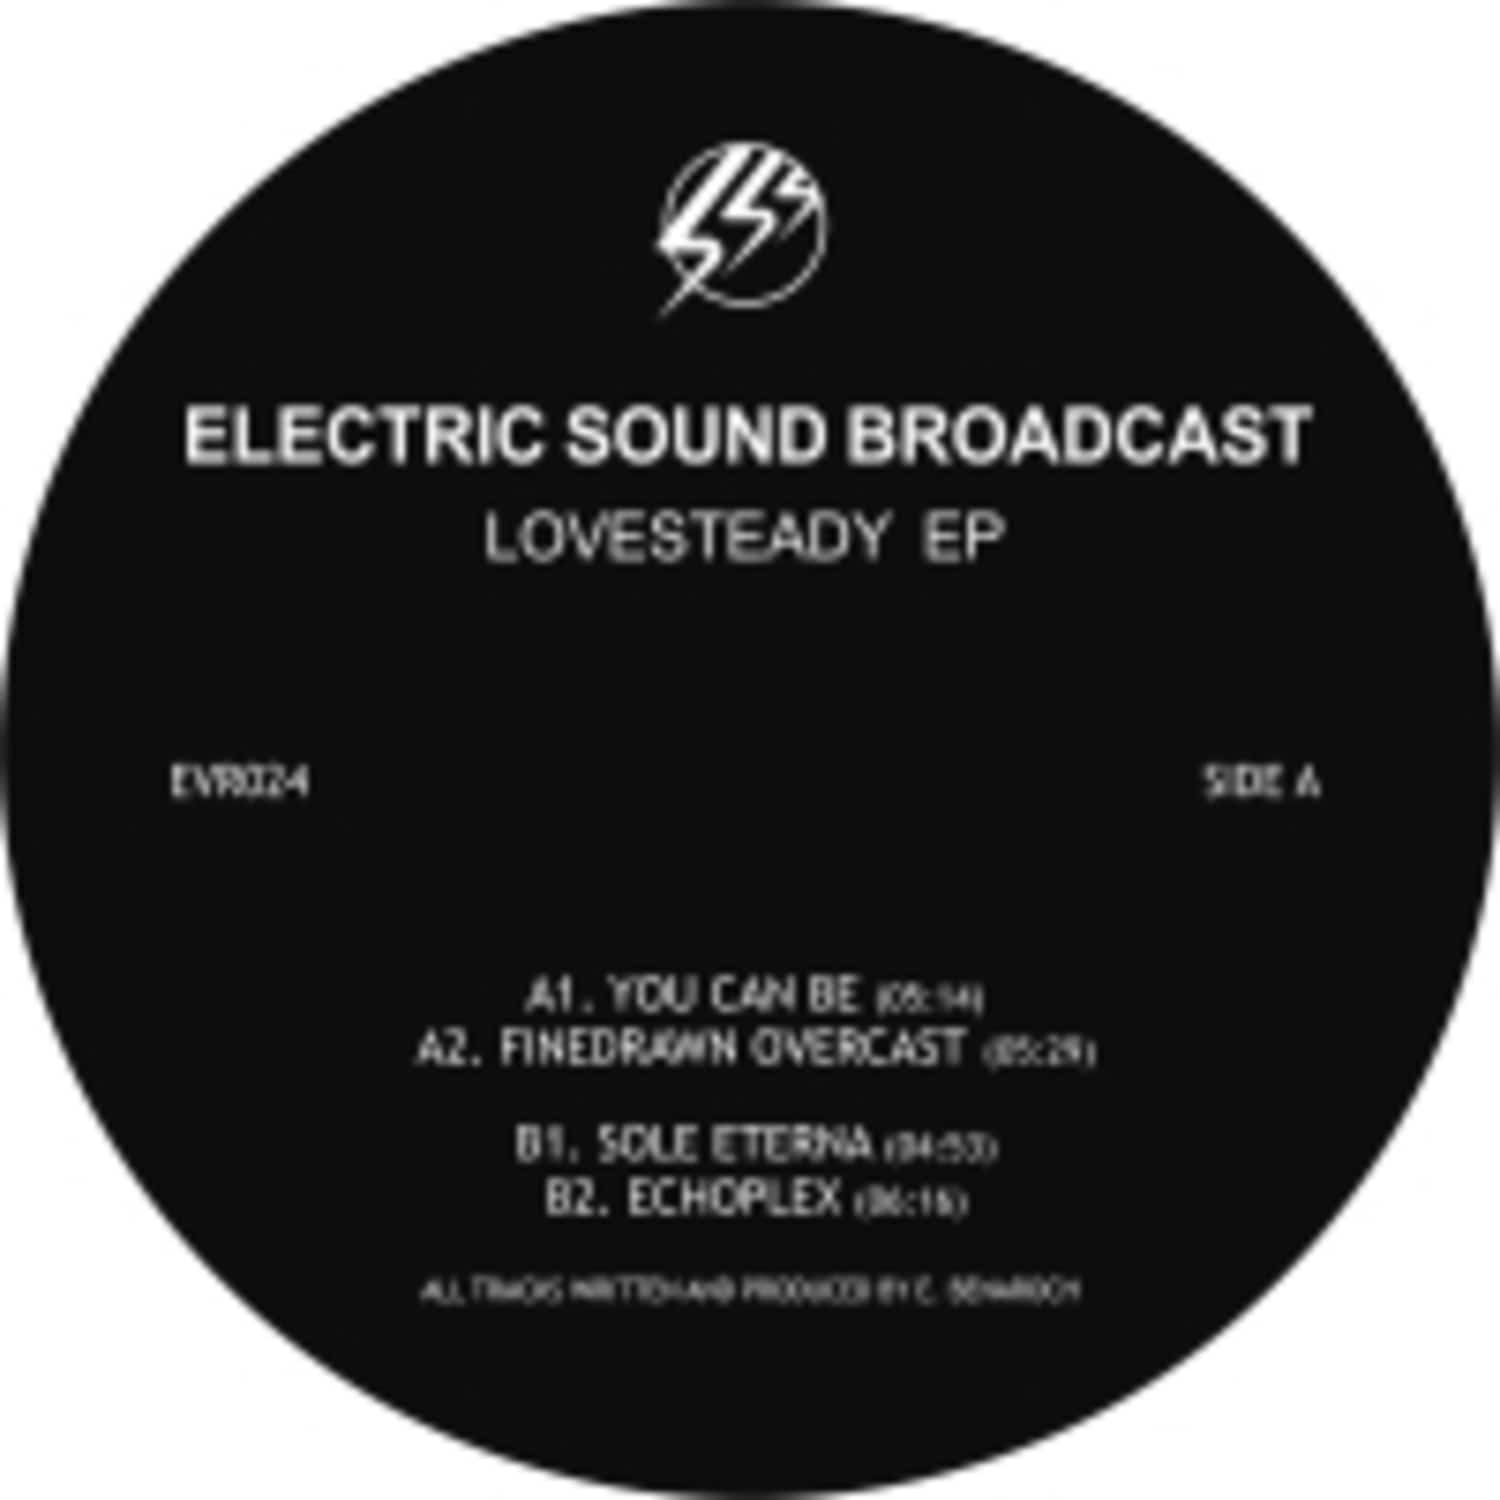 Electric Sound Broadcast - LOVESTEADY EP